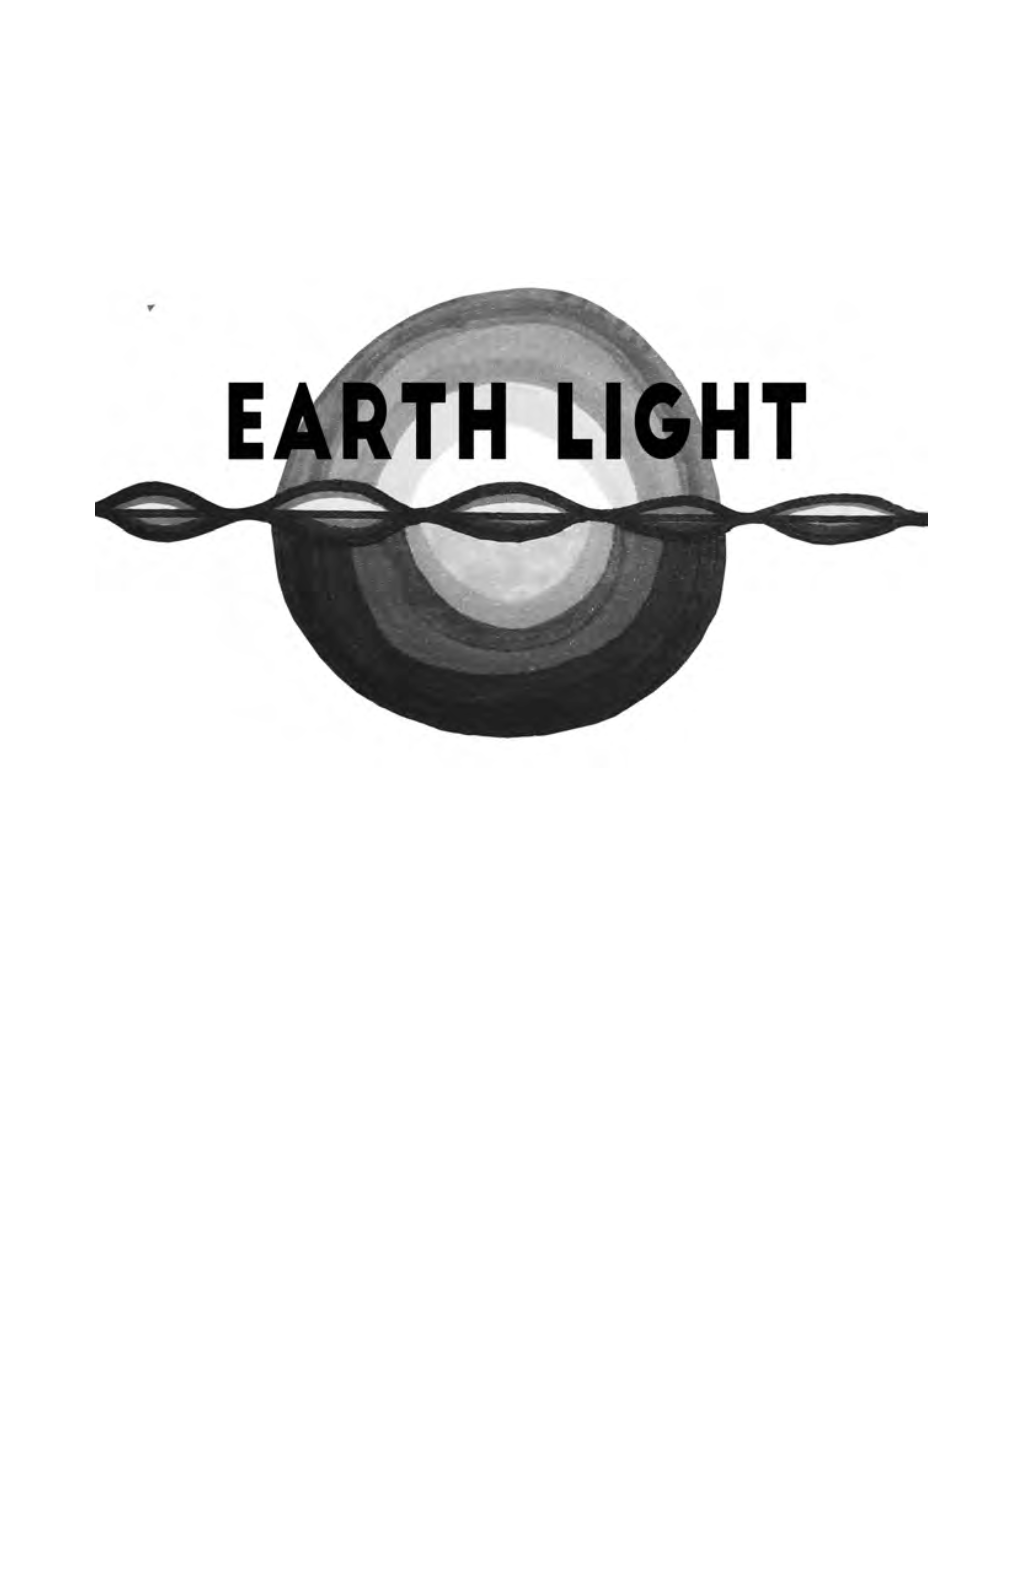 Earth Light Is the Latest Anthology of Poetry Written by K-12 Students in Mendocino County